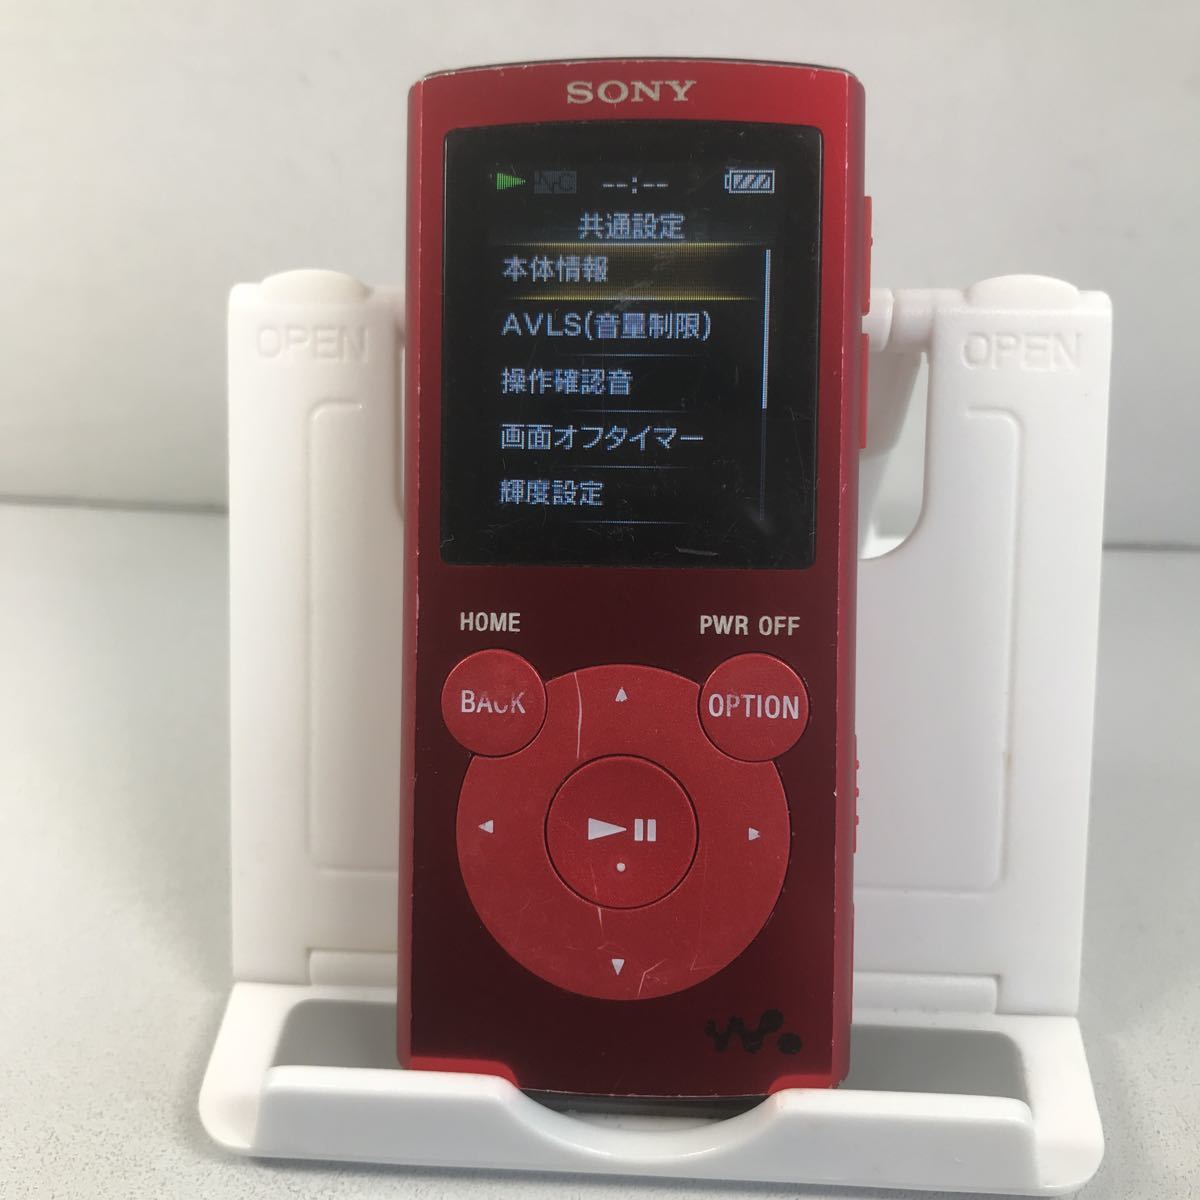 SONY アクティブスピーカーキット RDP-NWT6M 赤(レッド) ソニー